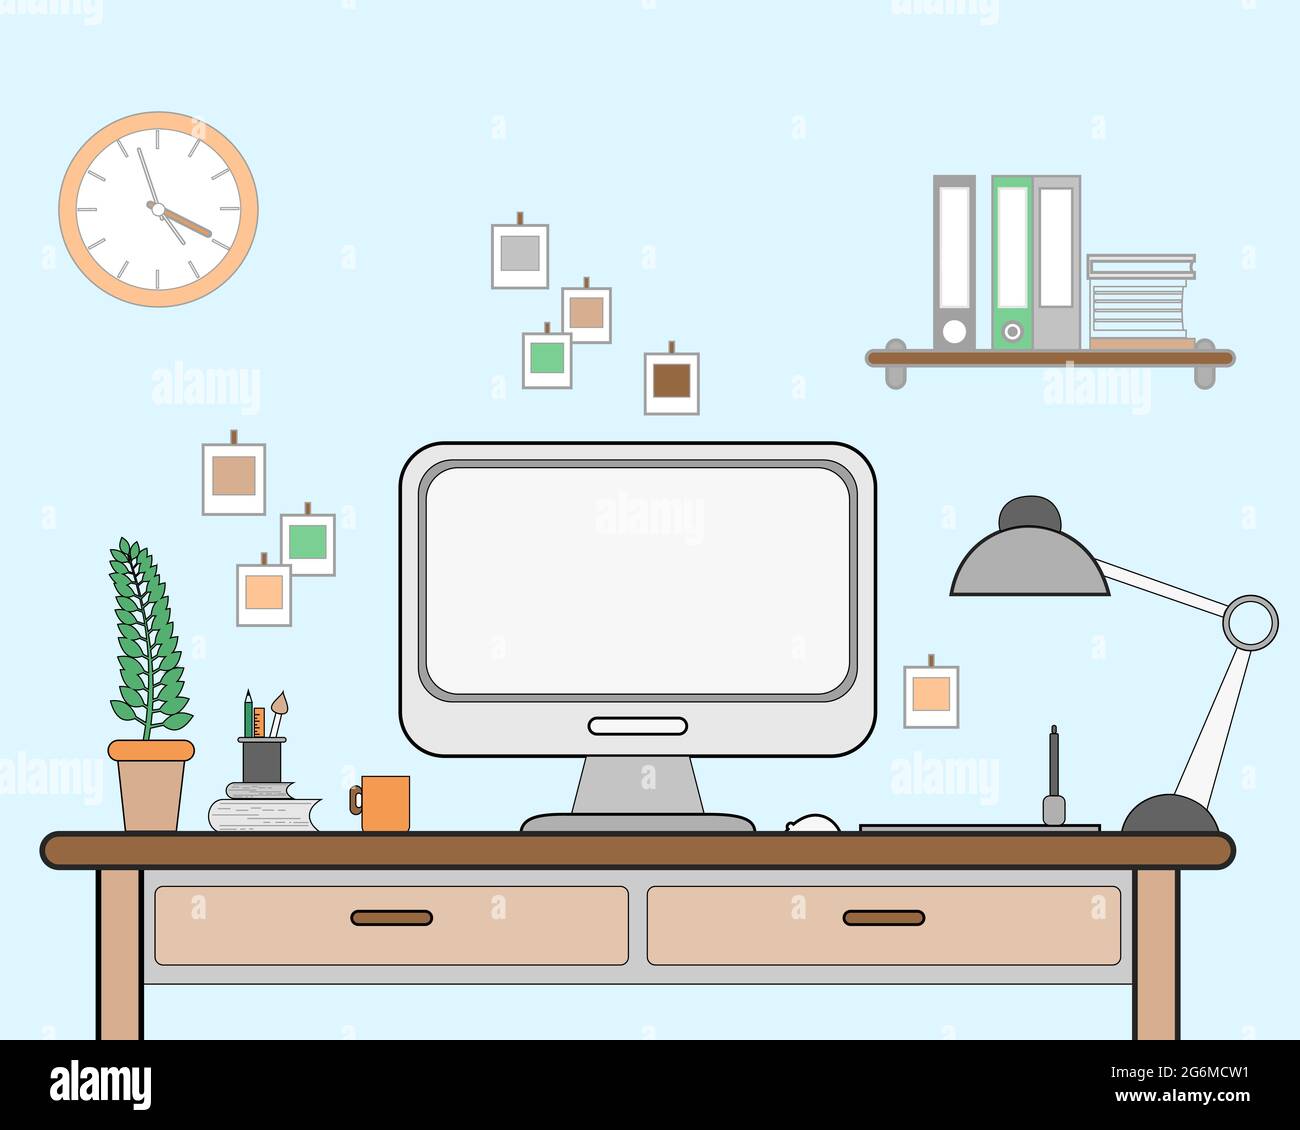 Vector illustration workspace for freelancer with computer, lamp, shelf, books, and cup of coffee on blue wall background in flat style with line. Stock Vector